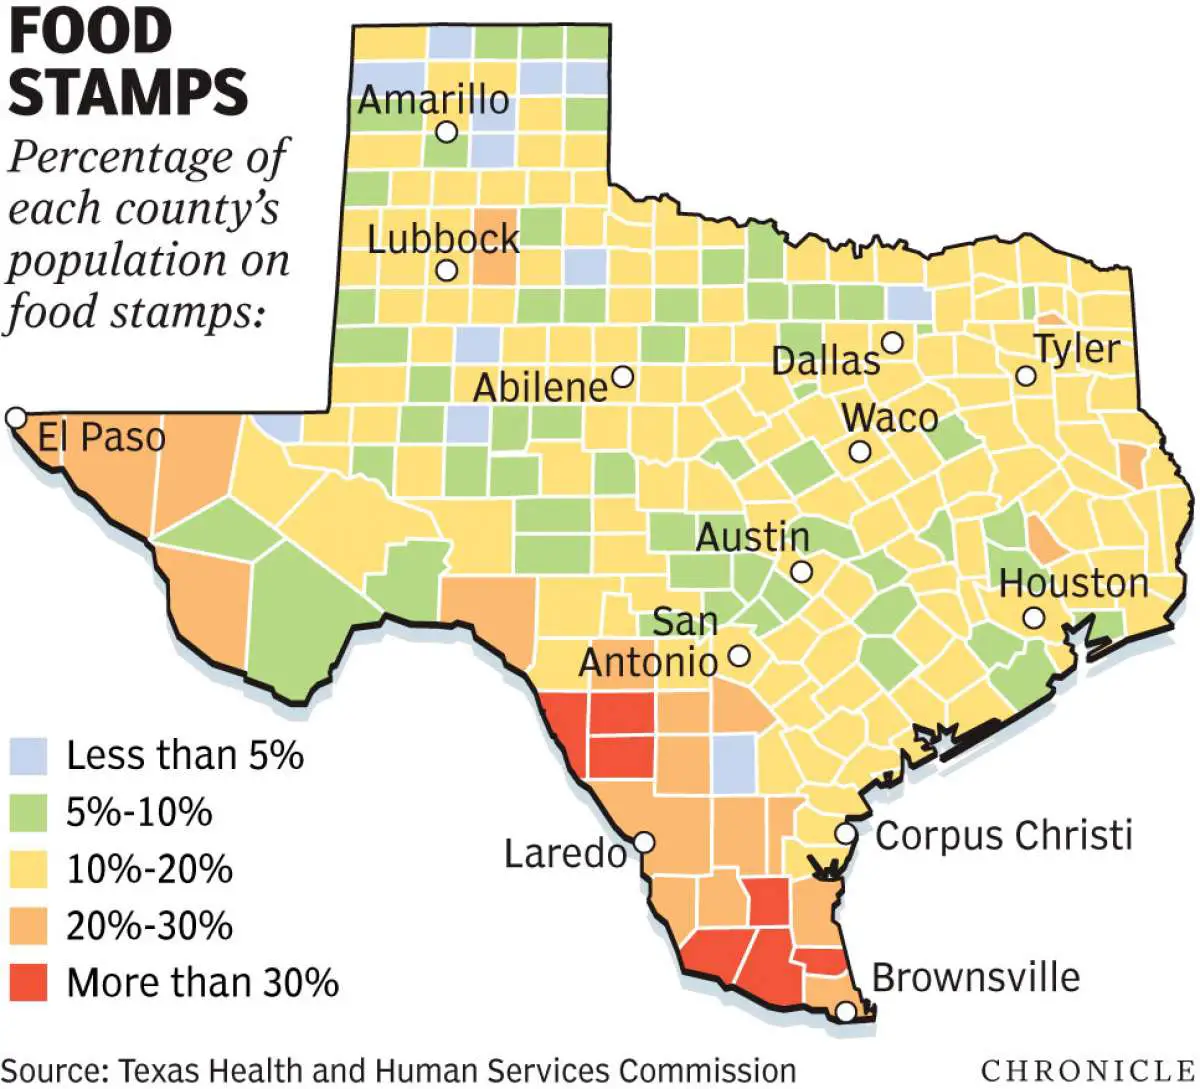 Food stamps hit record level in Texas